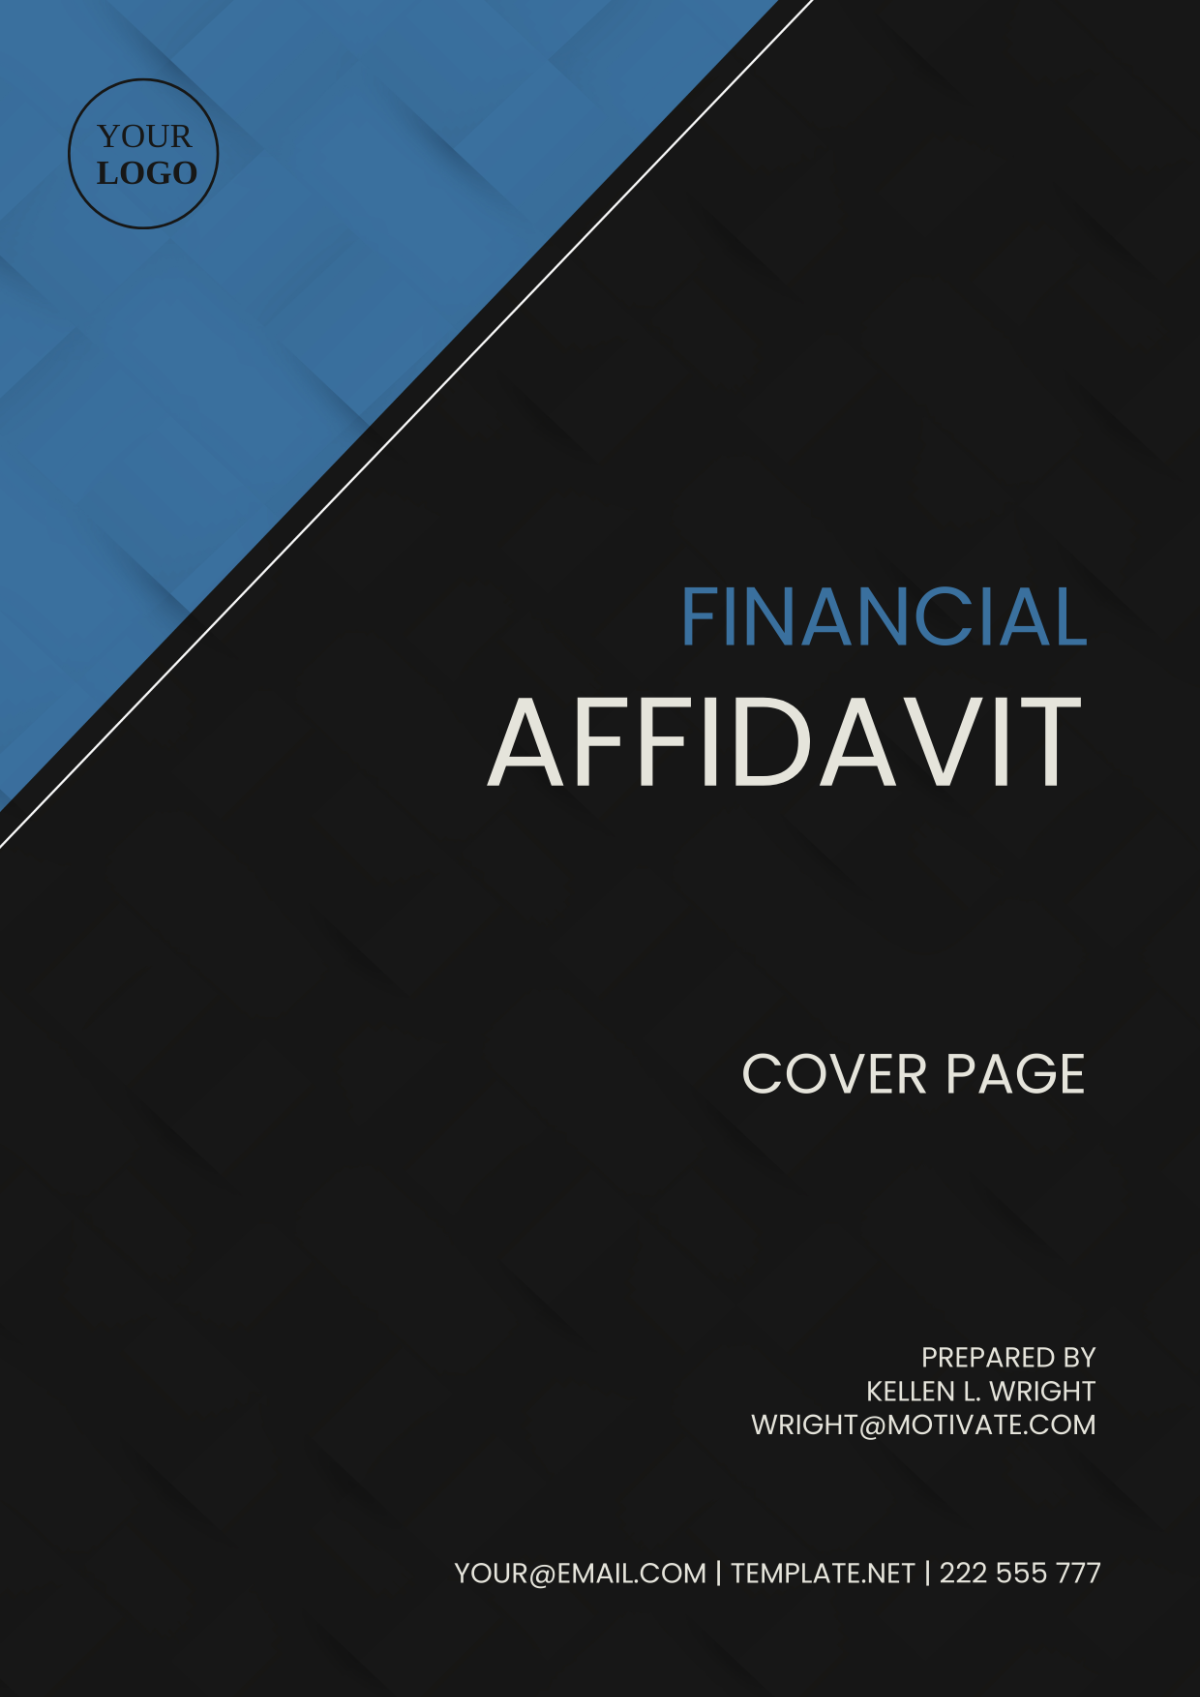 Financial Affidavit Cover Page Template